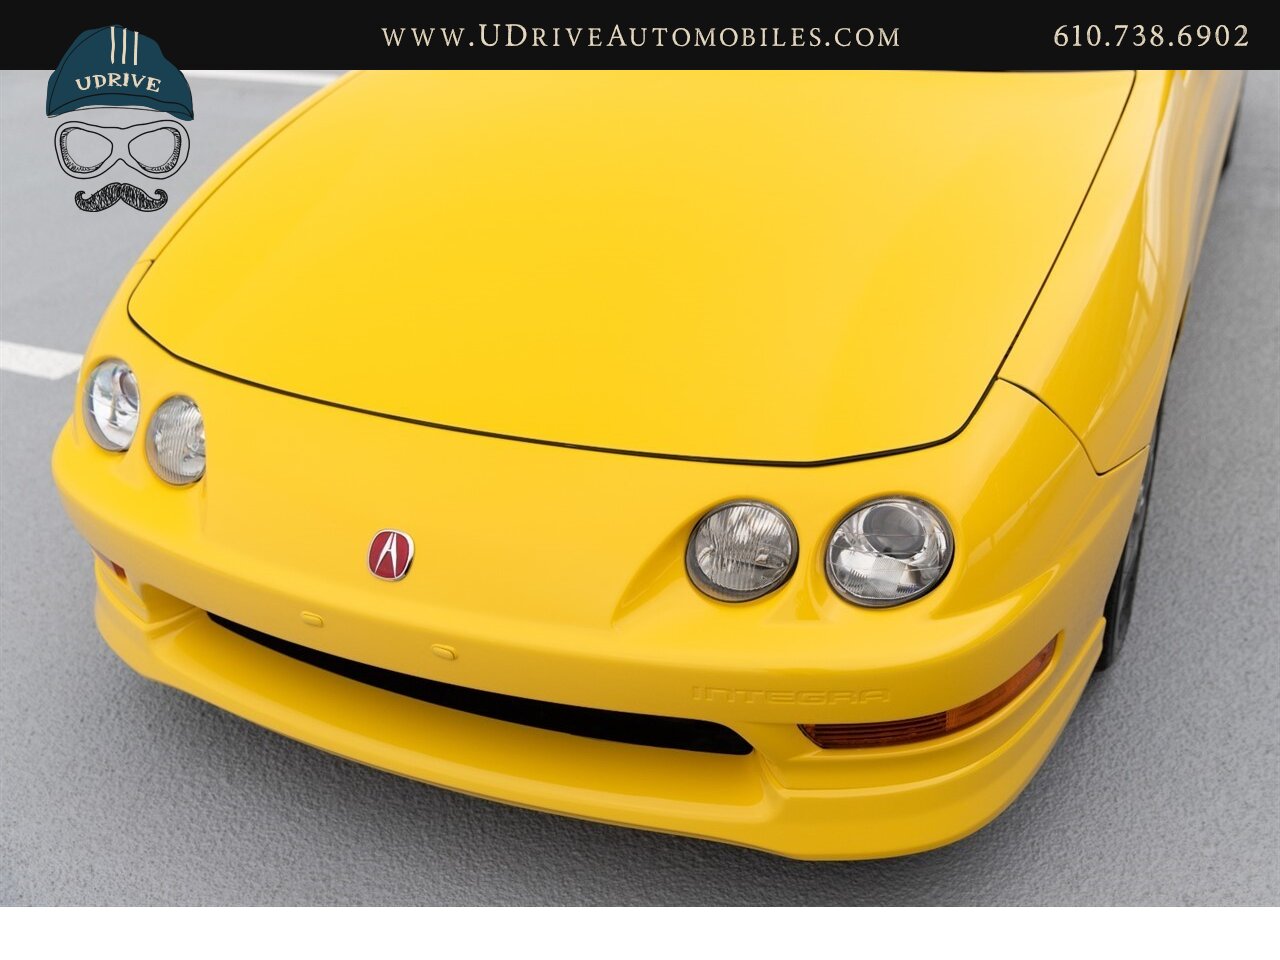 2001 Acura Integra Type R  38k Miles 2 Owners - Photo 23 - West Chester, PA 19382